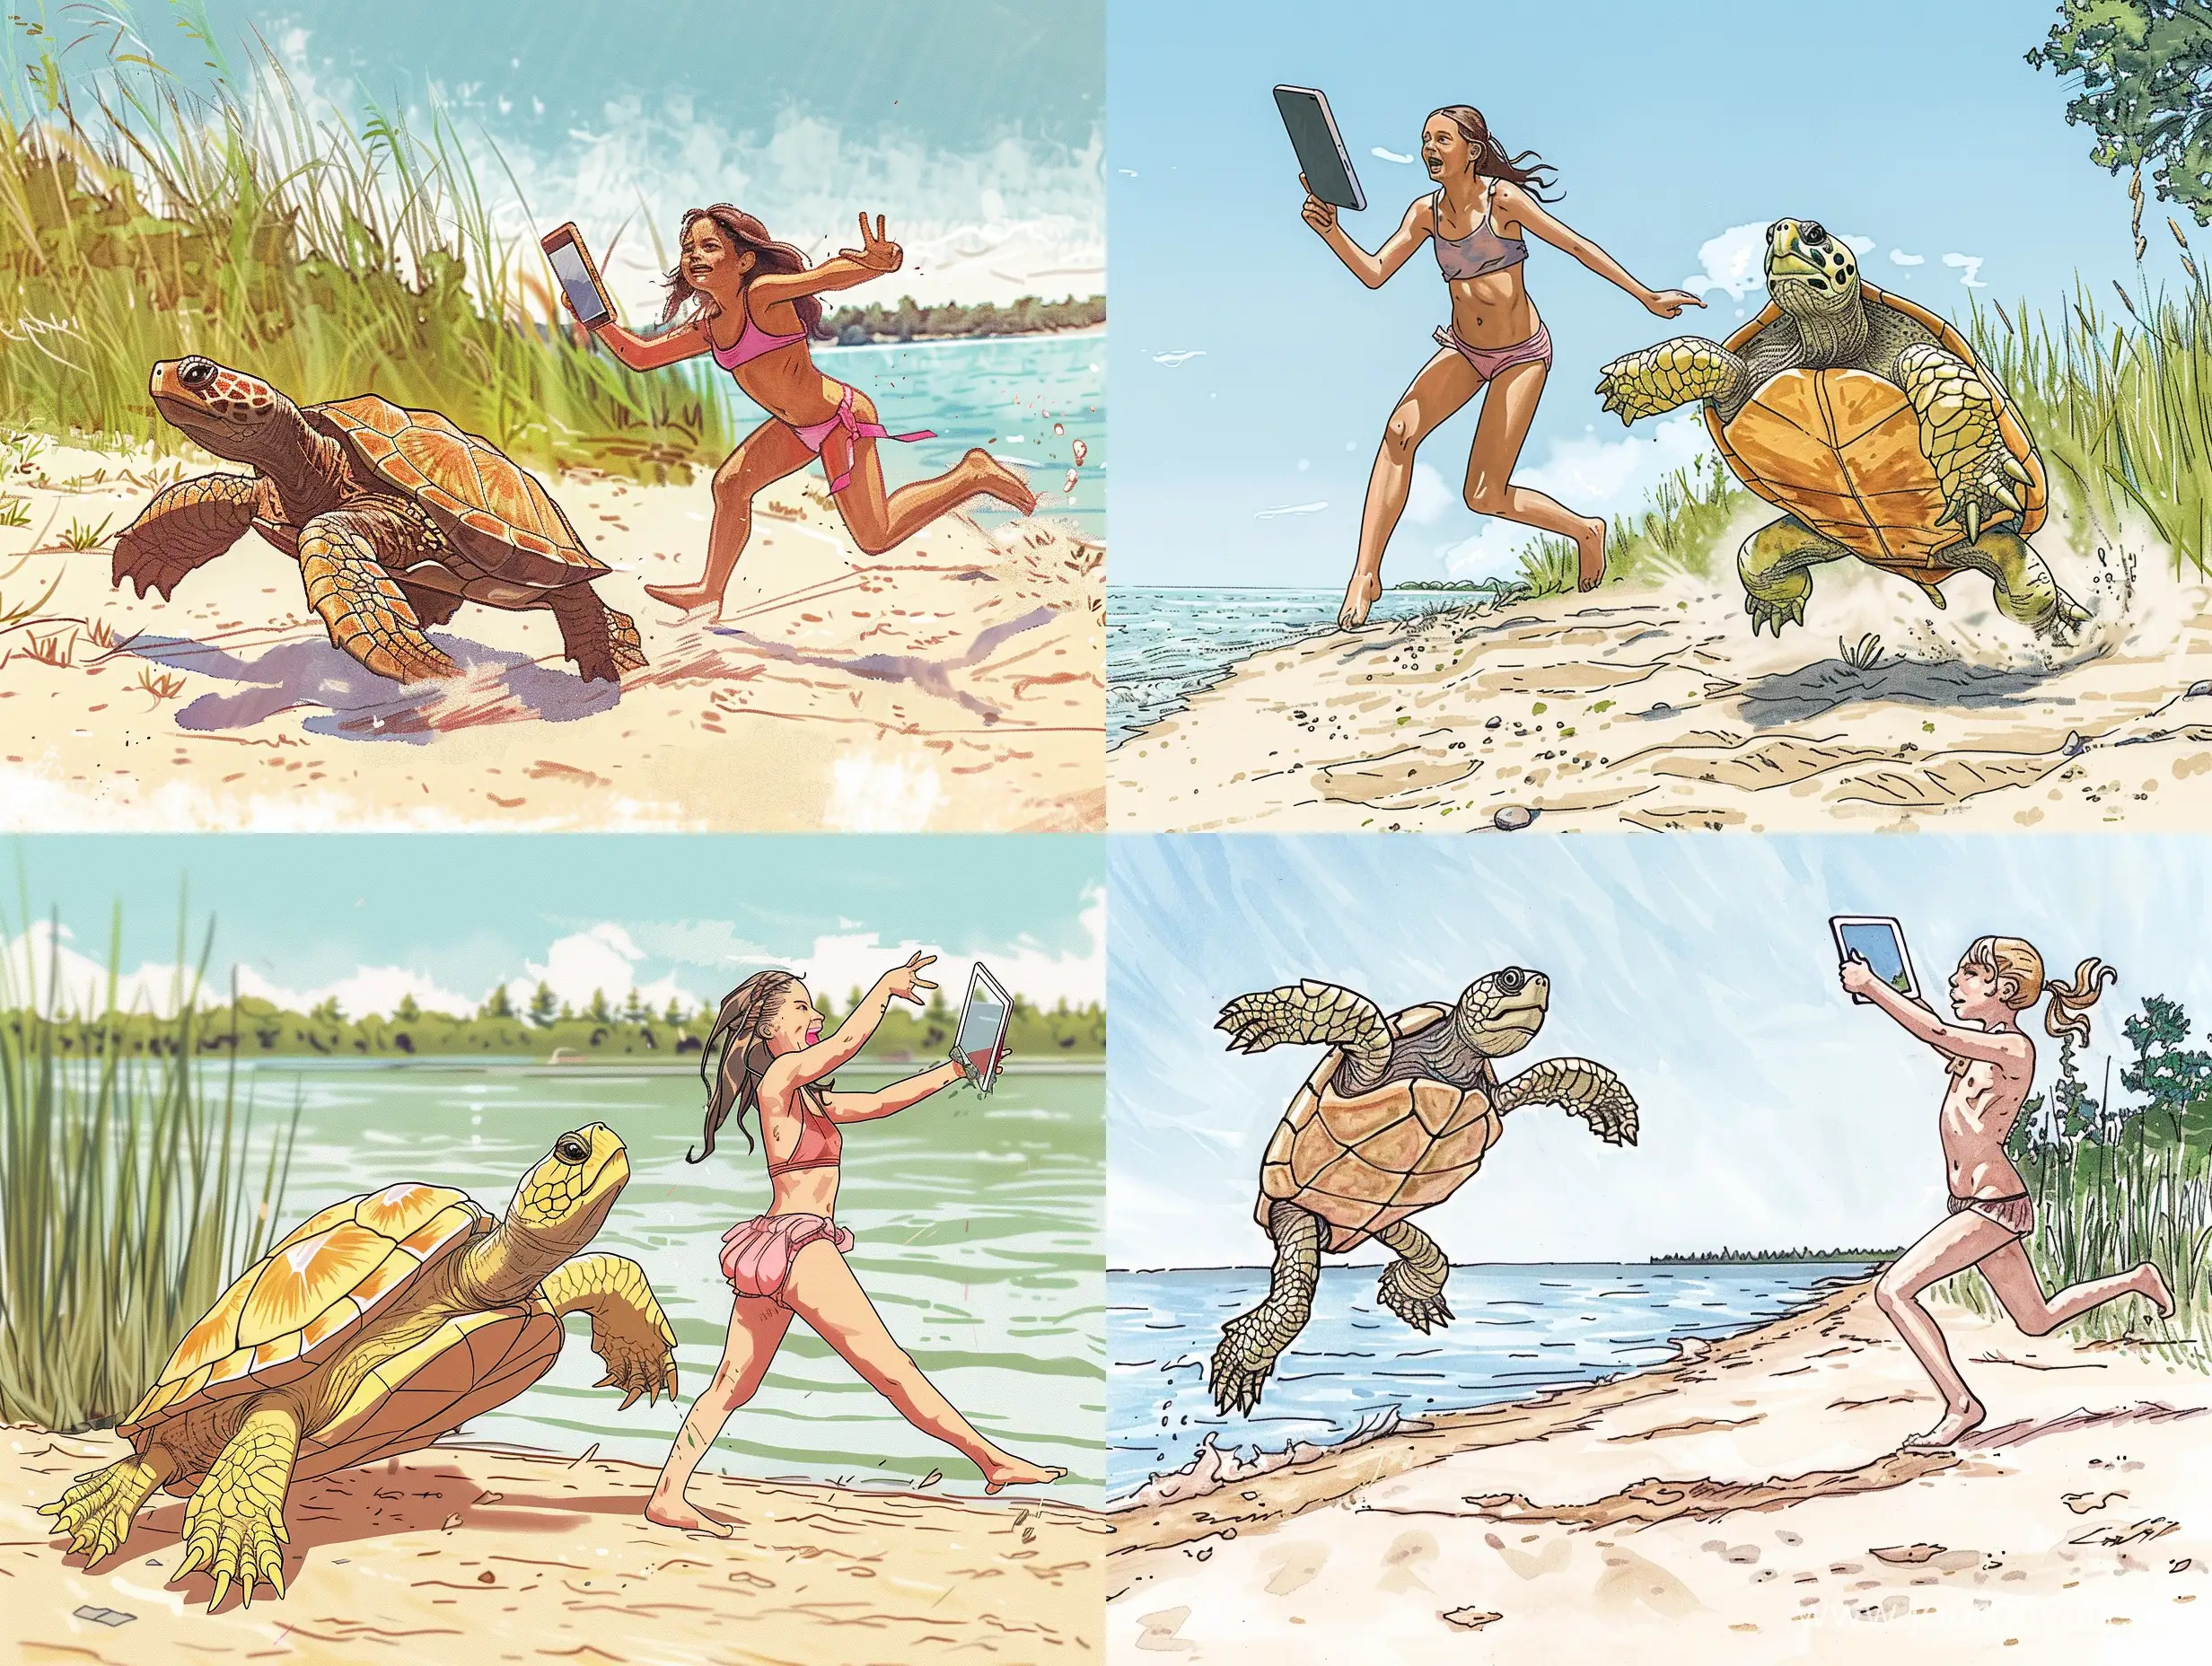 landscape format, sideview, summer, hot, lake shore, a big turtle is running hard on its hind legs, a non-dressed girl is chasing it in the same direction, the girl is running with her tablet raised high to take a picture., in the style of illustration for teens with colored markers, medium level of detailing